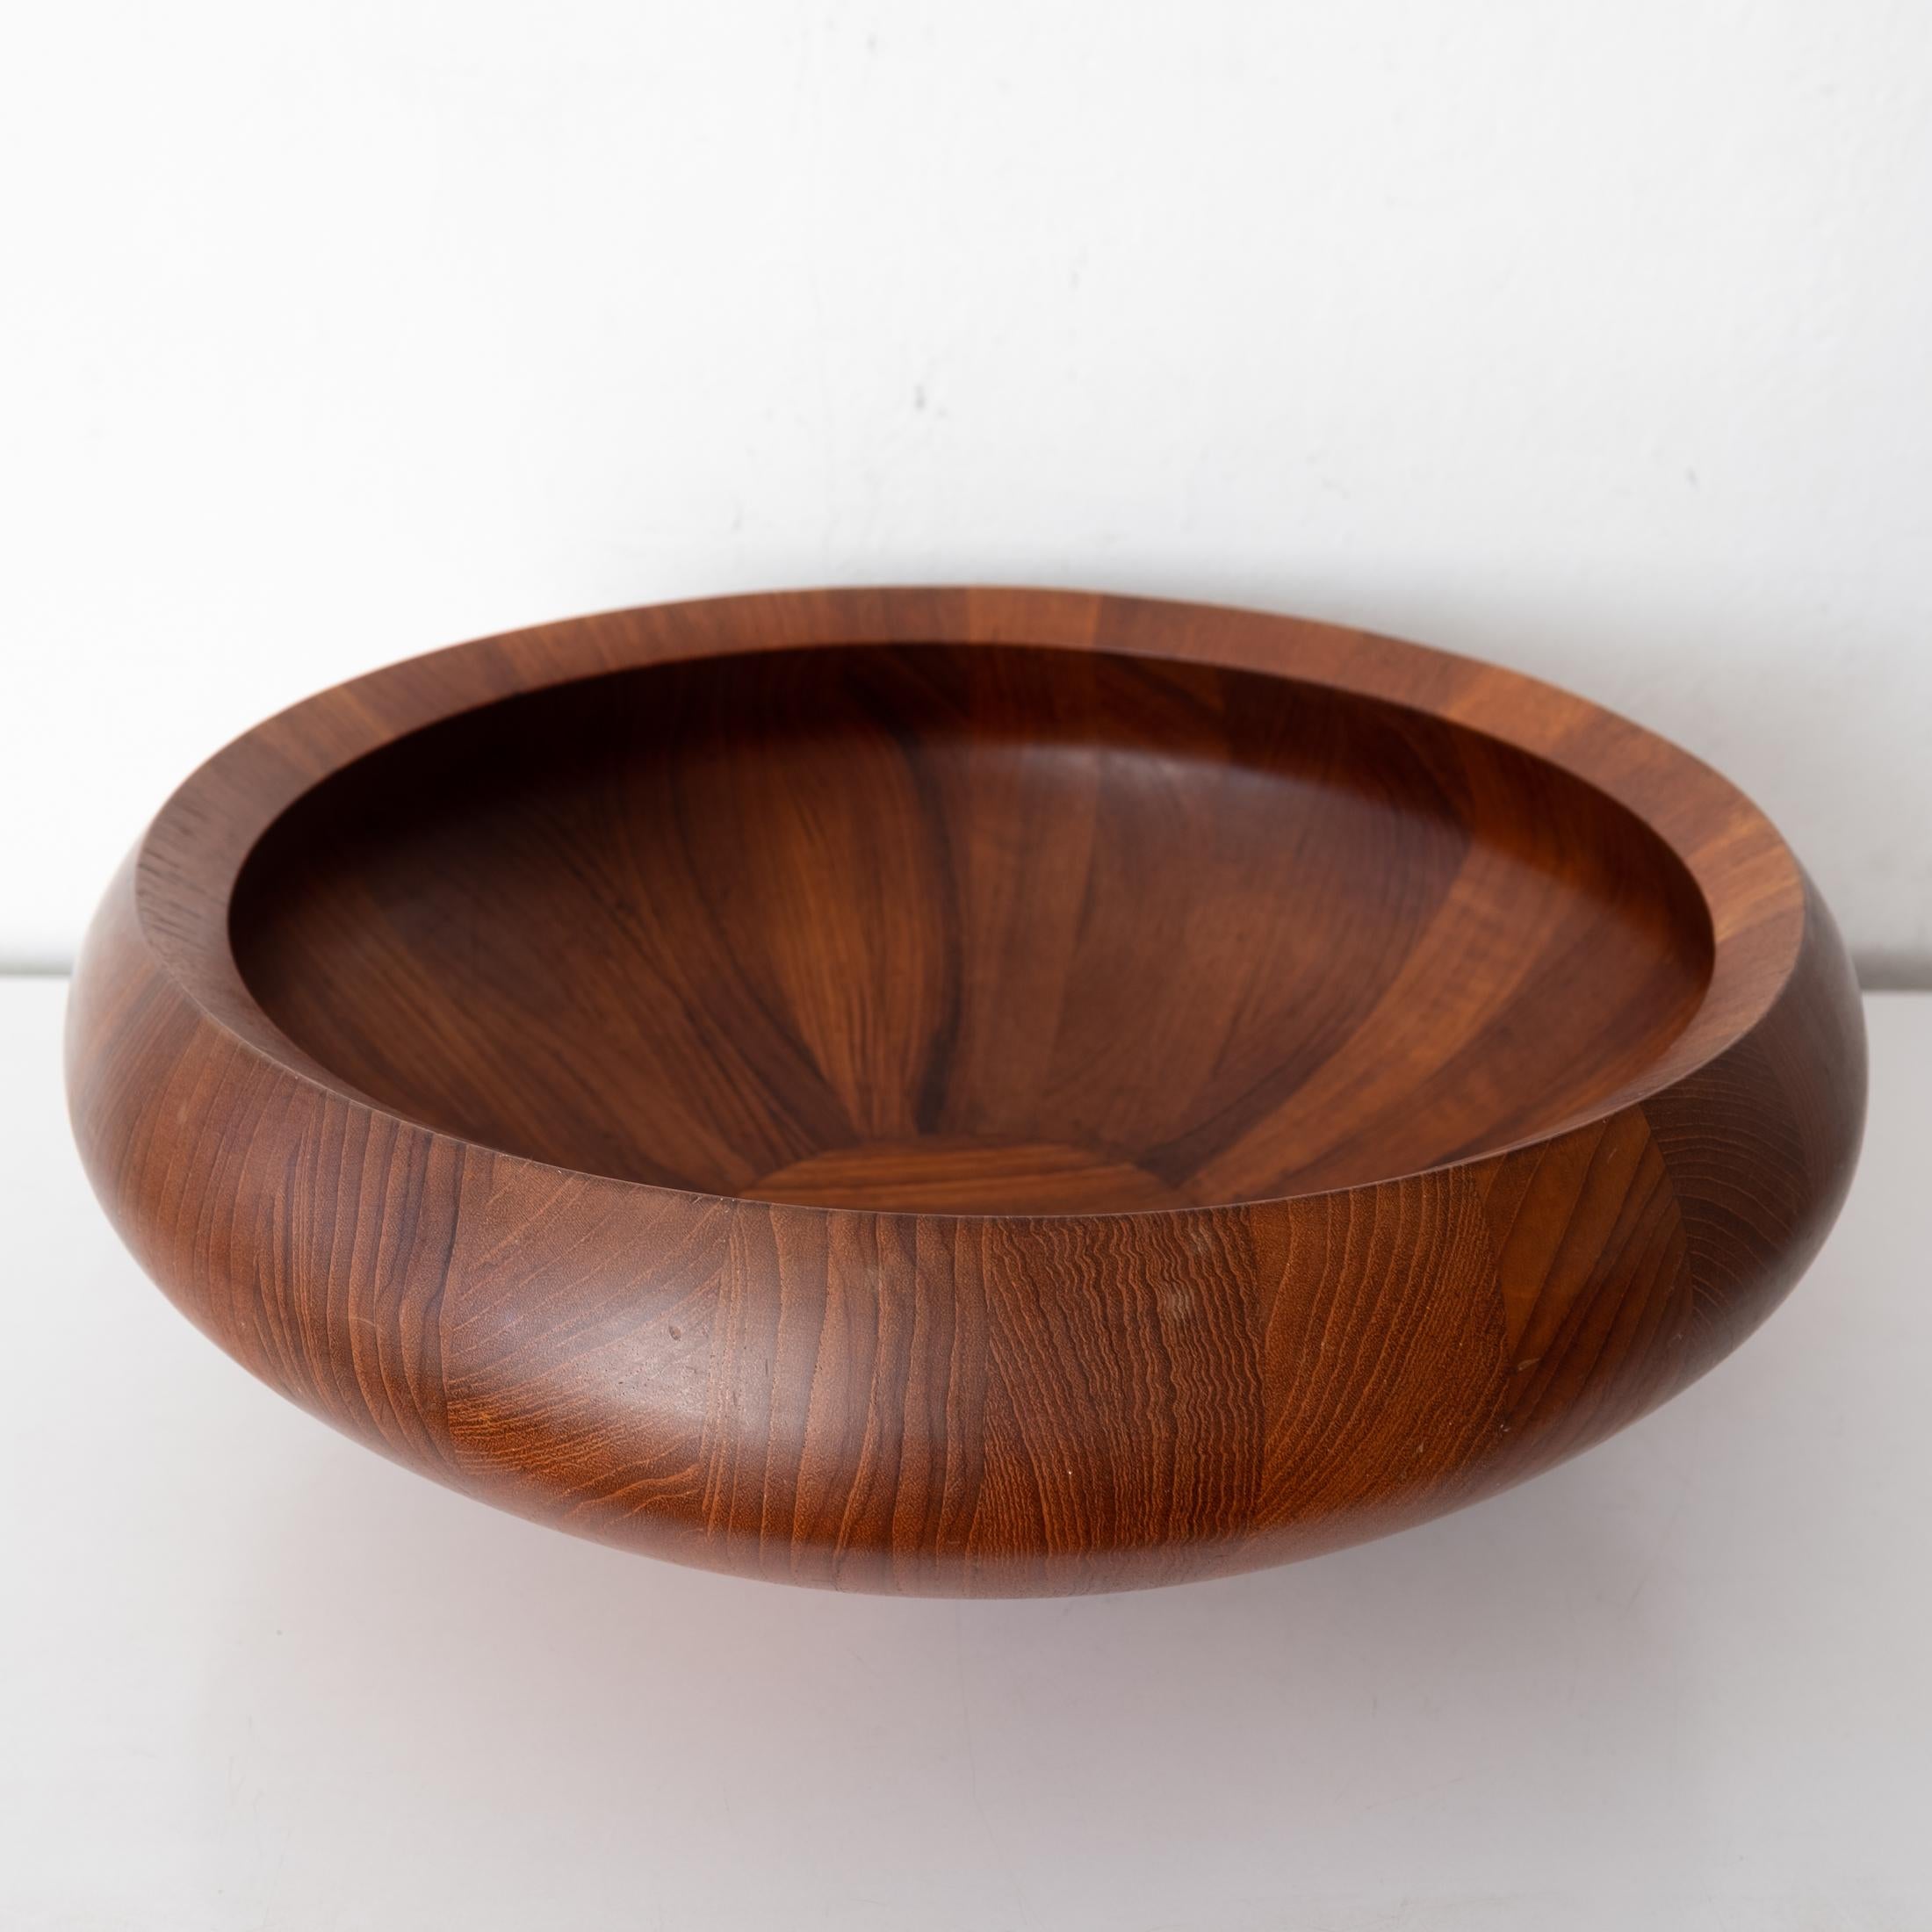 Large staved teak bowl by Jens Quistgaard for Dansk. Would make a great fruit or salad bowl. Beautiful old growth teak. Made in Denmark, 1960s.